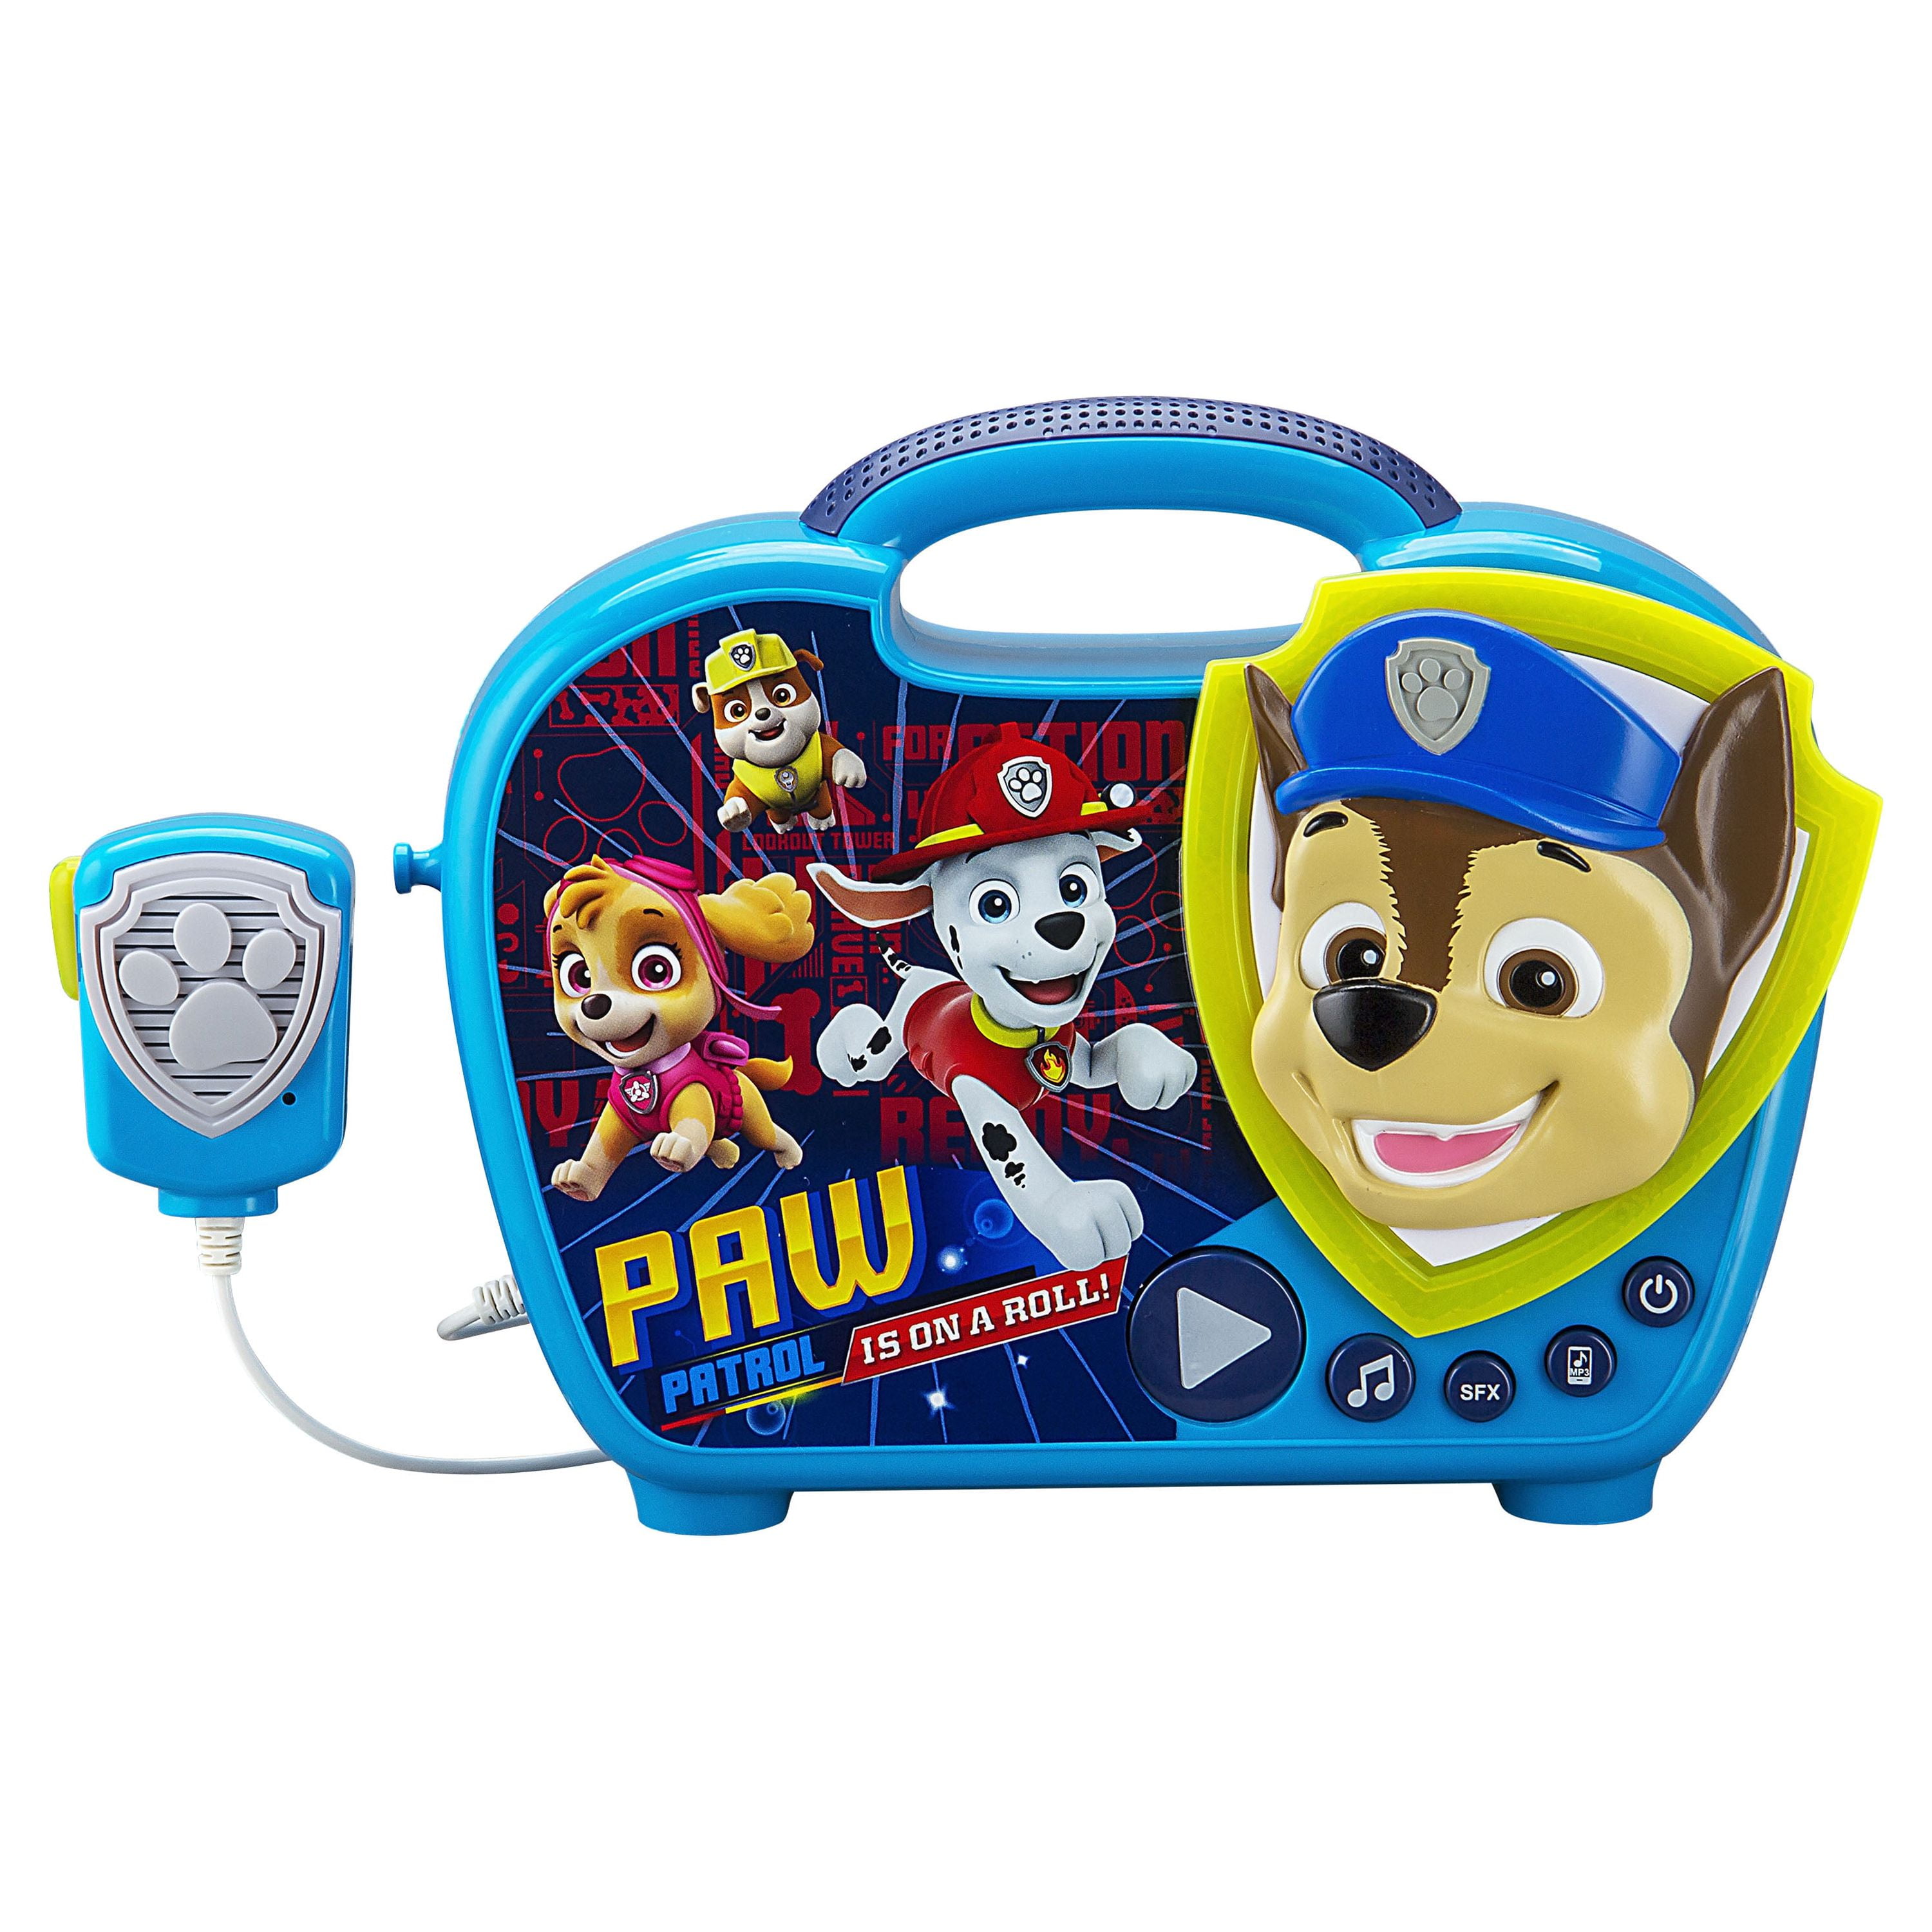 Paw Patrol Sing Along Boombox with Microphone. Sing Along to Built in  Music. Real Working Microphone. Connects to your MP3 Player Device.